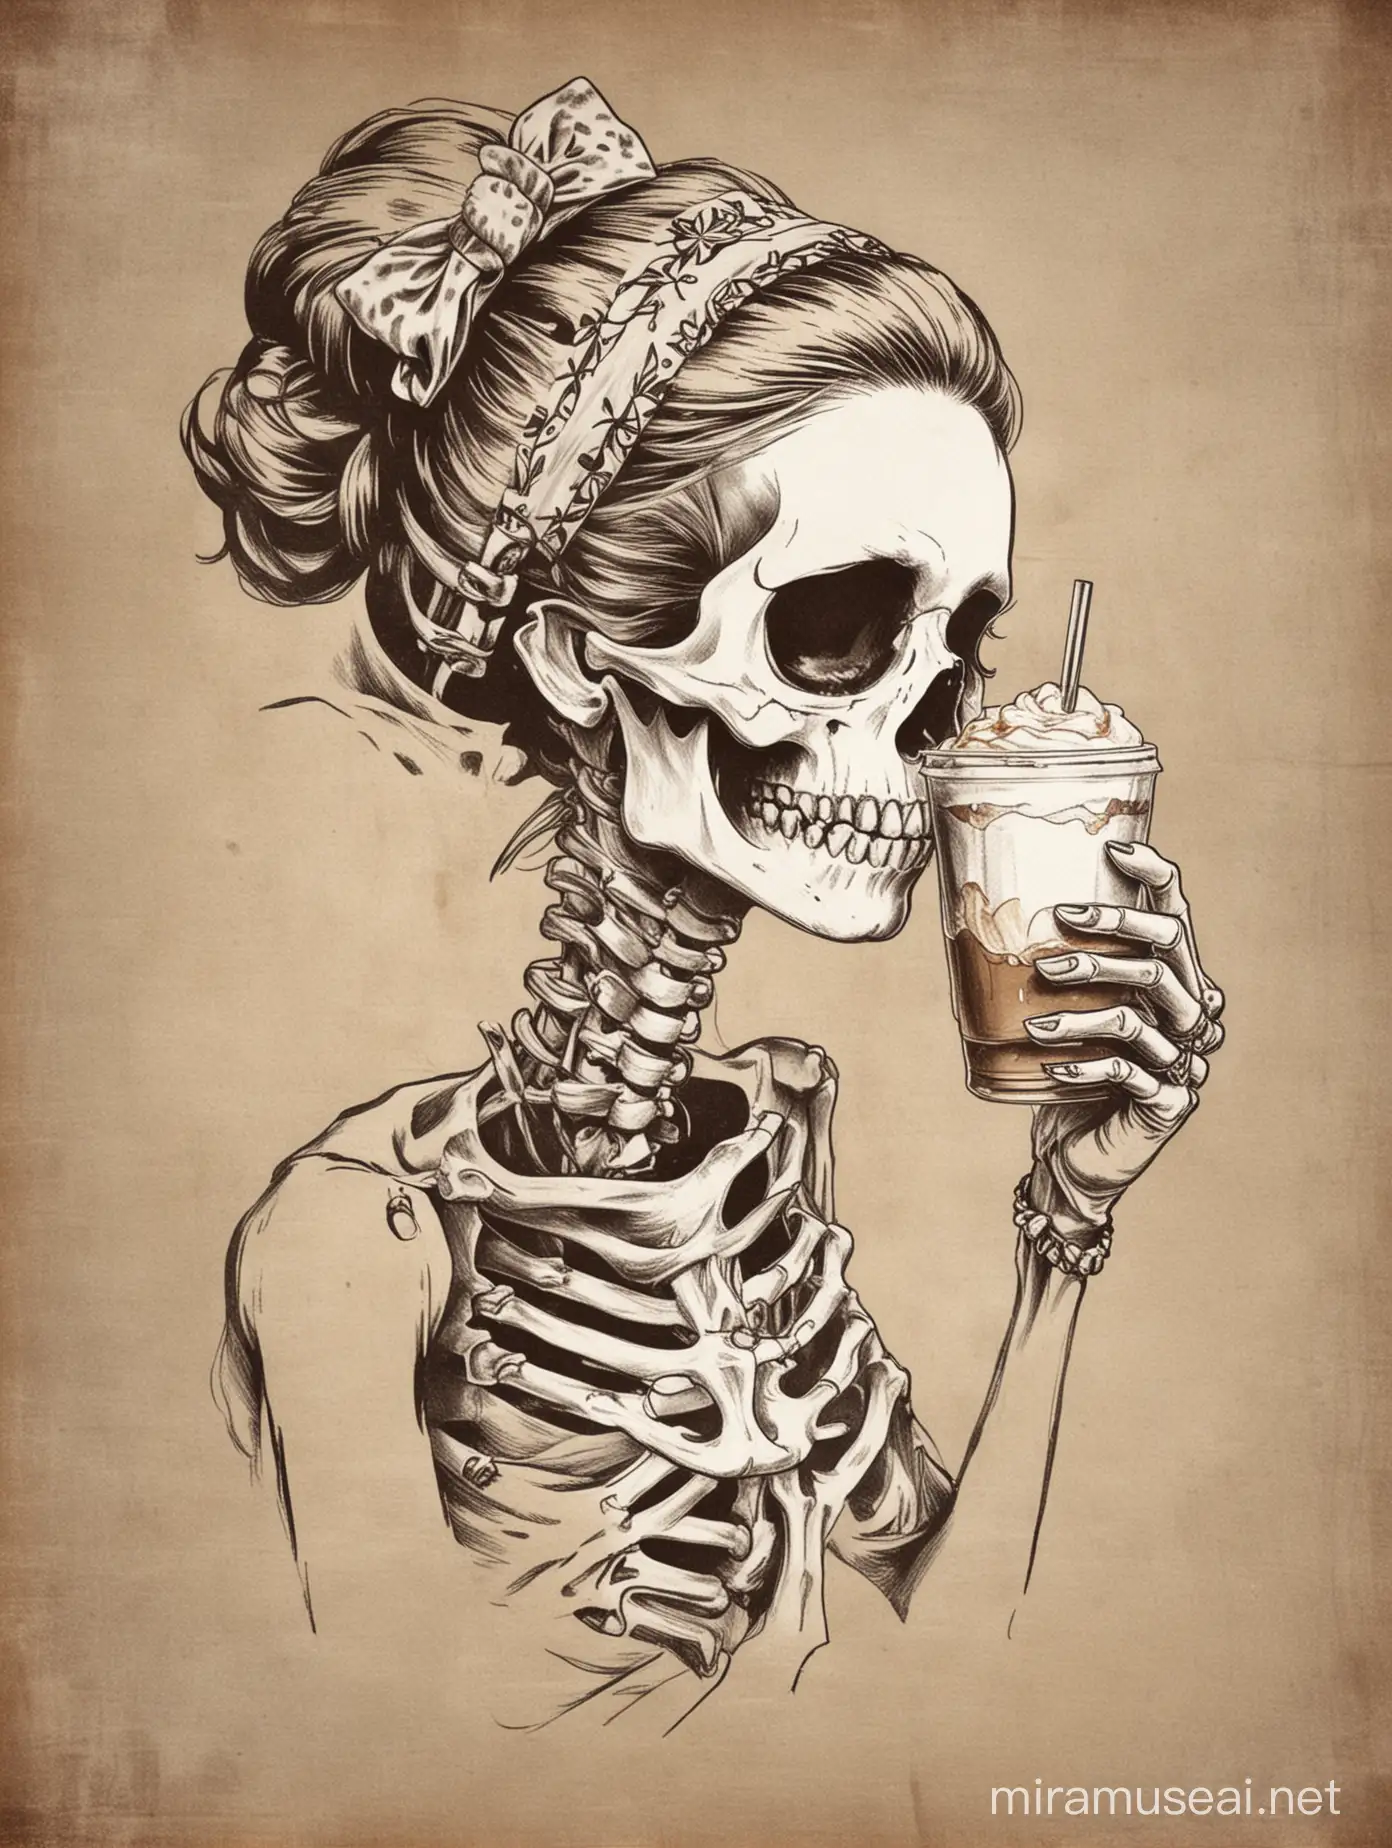 Vintage poster design, stencils, simple, minimalism, vector art, Sketch drawing, flat, 2d, a skeleton with hair in a bun on his head, head Hollywood style bow bandana,drawing drawing of female skeleton with four fingers and thumb drinking large iced coffee raised to mouth sucking into straw, Do not crop images, black and white color